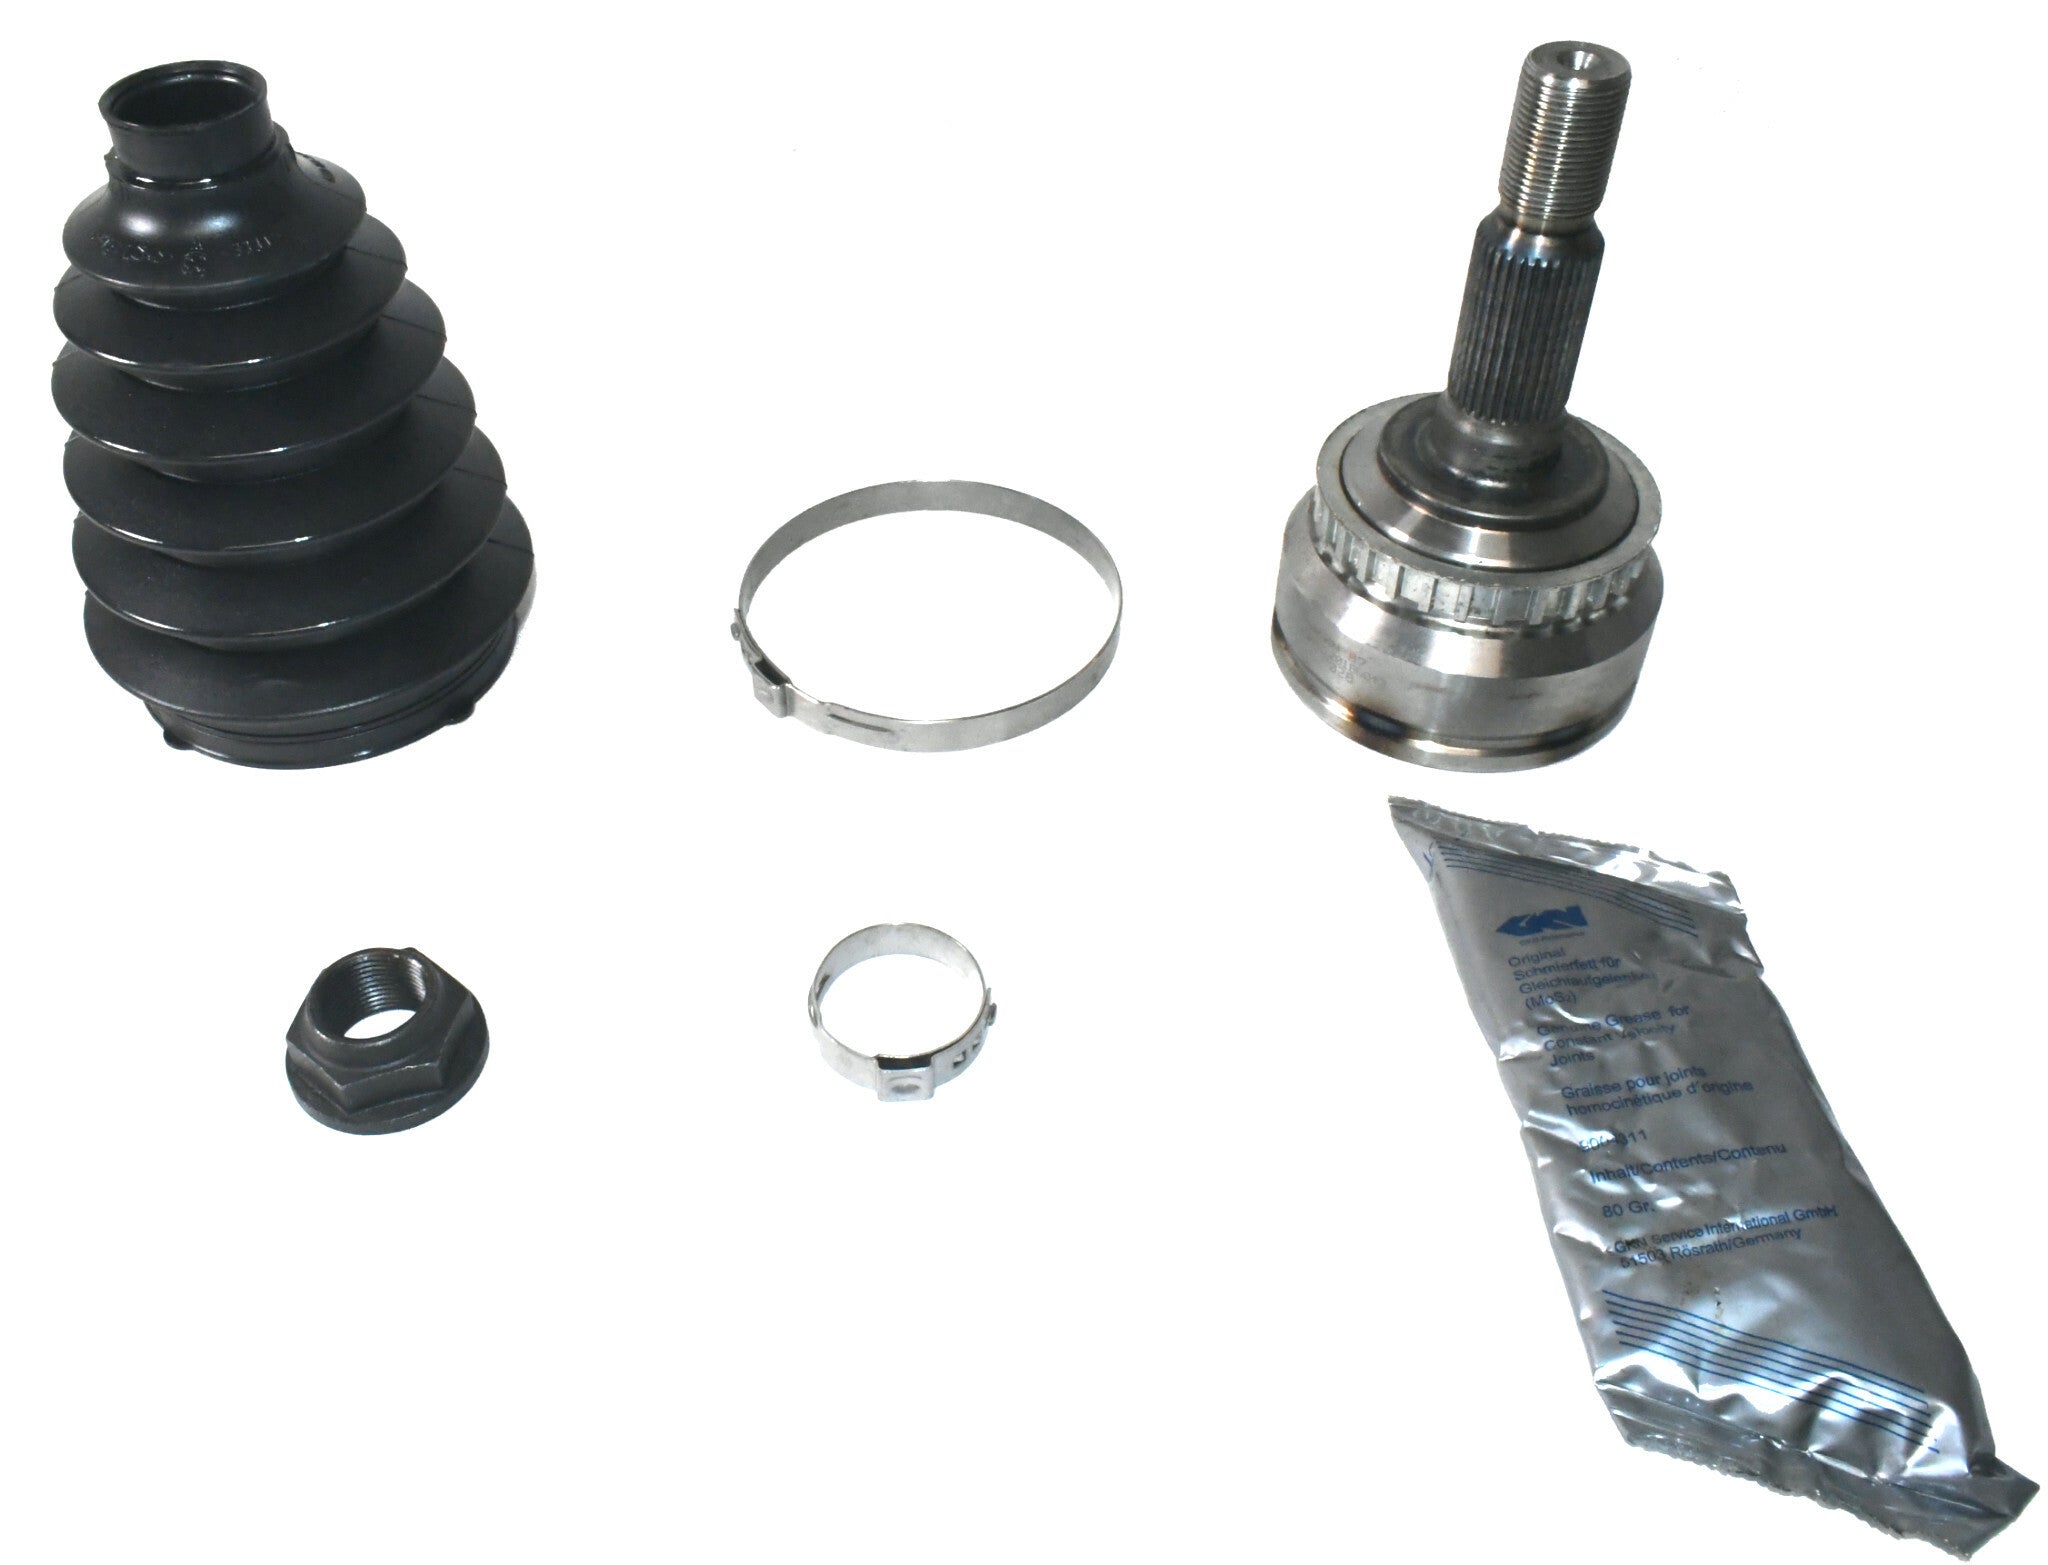 New outer CV joint kit for 1993-1998 SAAB 900 Mk II & 1998-2002 9-3 from GKN 302459